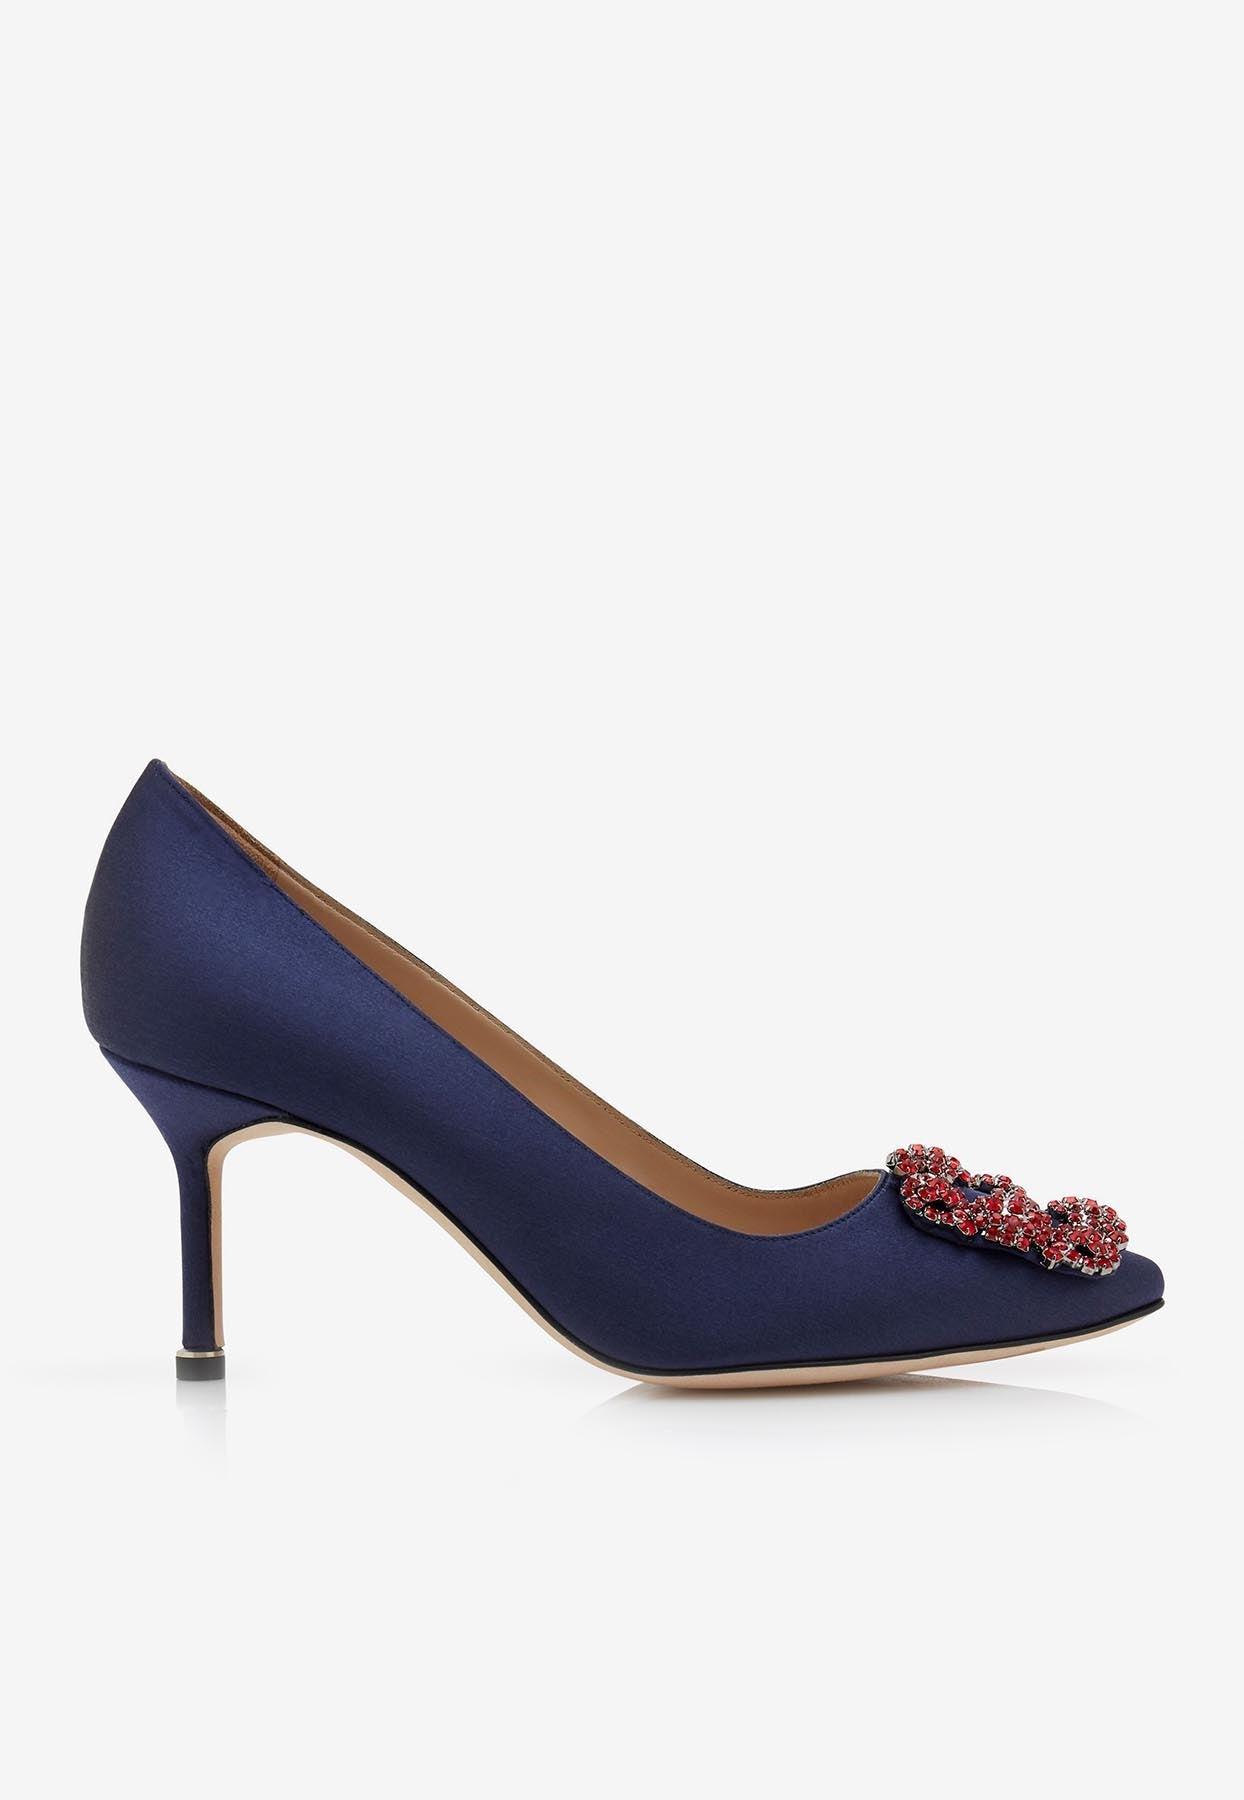 Manolo Blahnik Hangisi 70 Satin Pumps With Crystal Buckle in Blue | Lyst